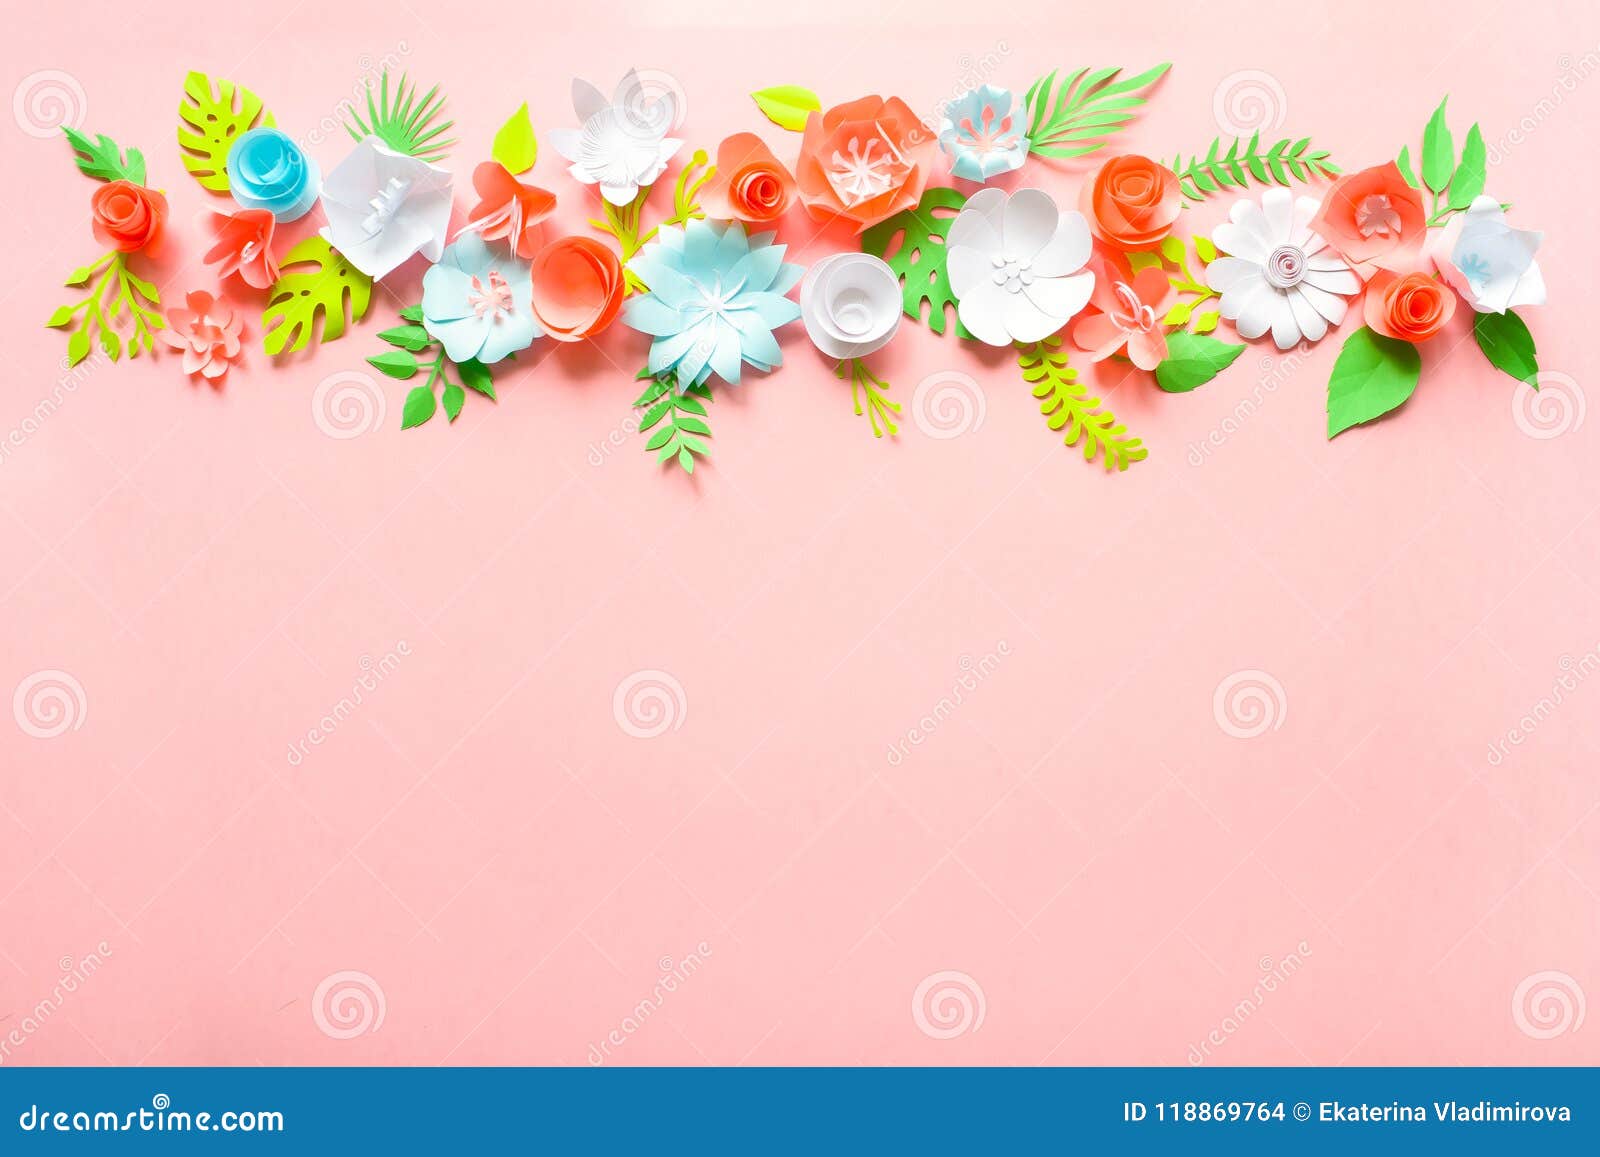 Download Greeting Card With Different Paper Flowers Stock Illustration Illustration of beautiful greeting